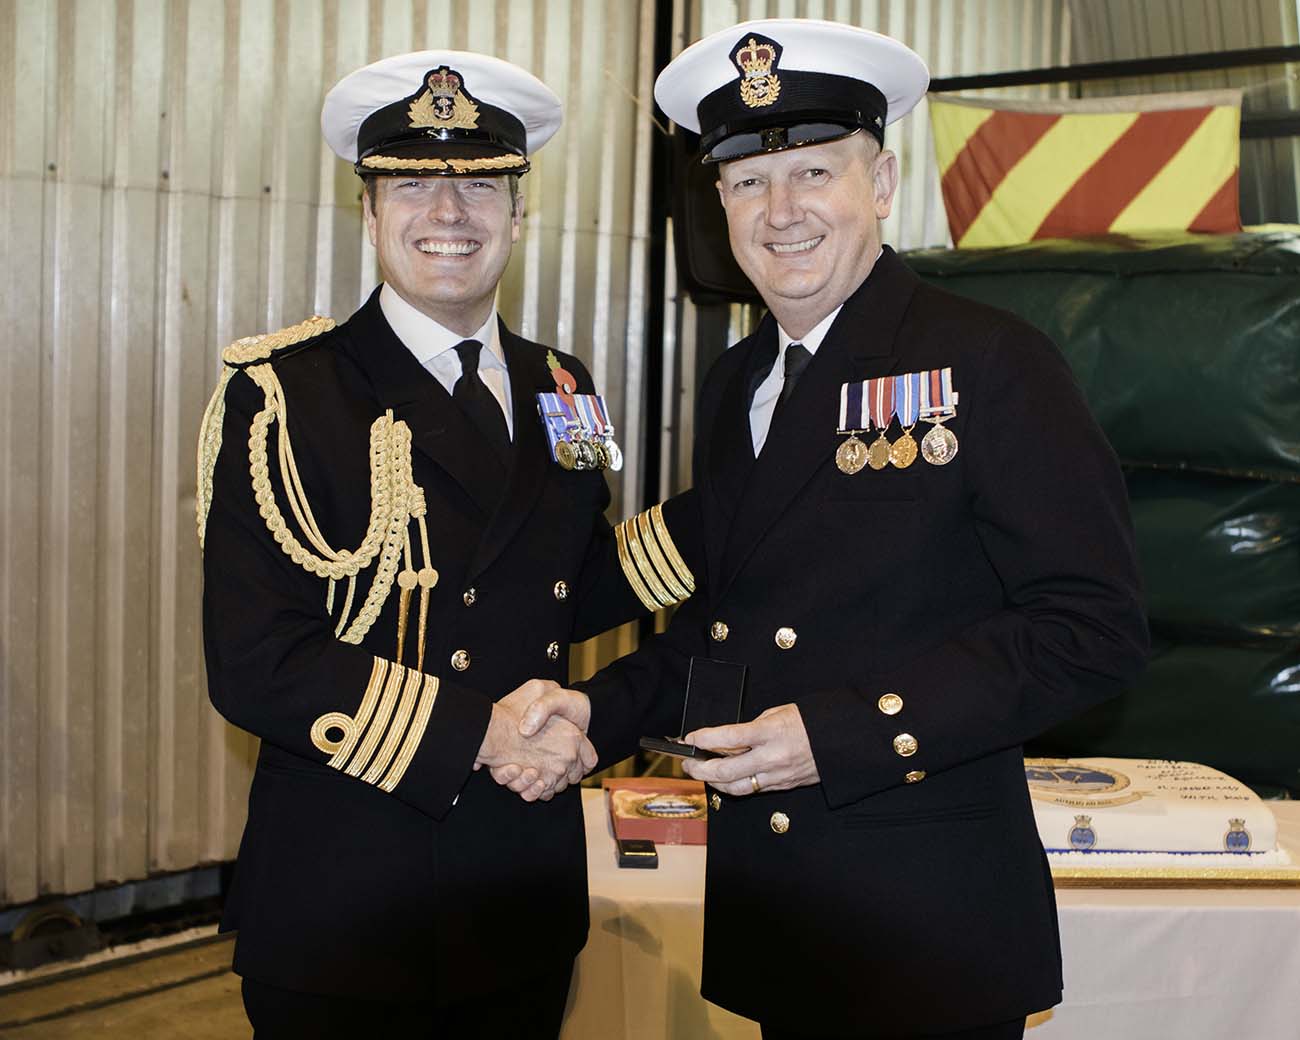 Maritime Aviation Support Unit becomes 1700 Squadron | Royal Navy